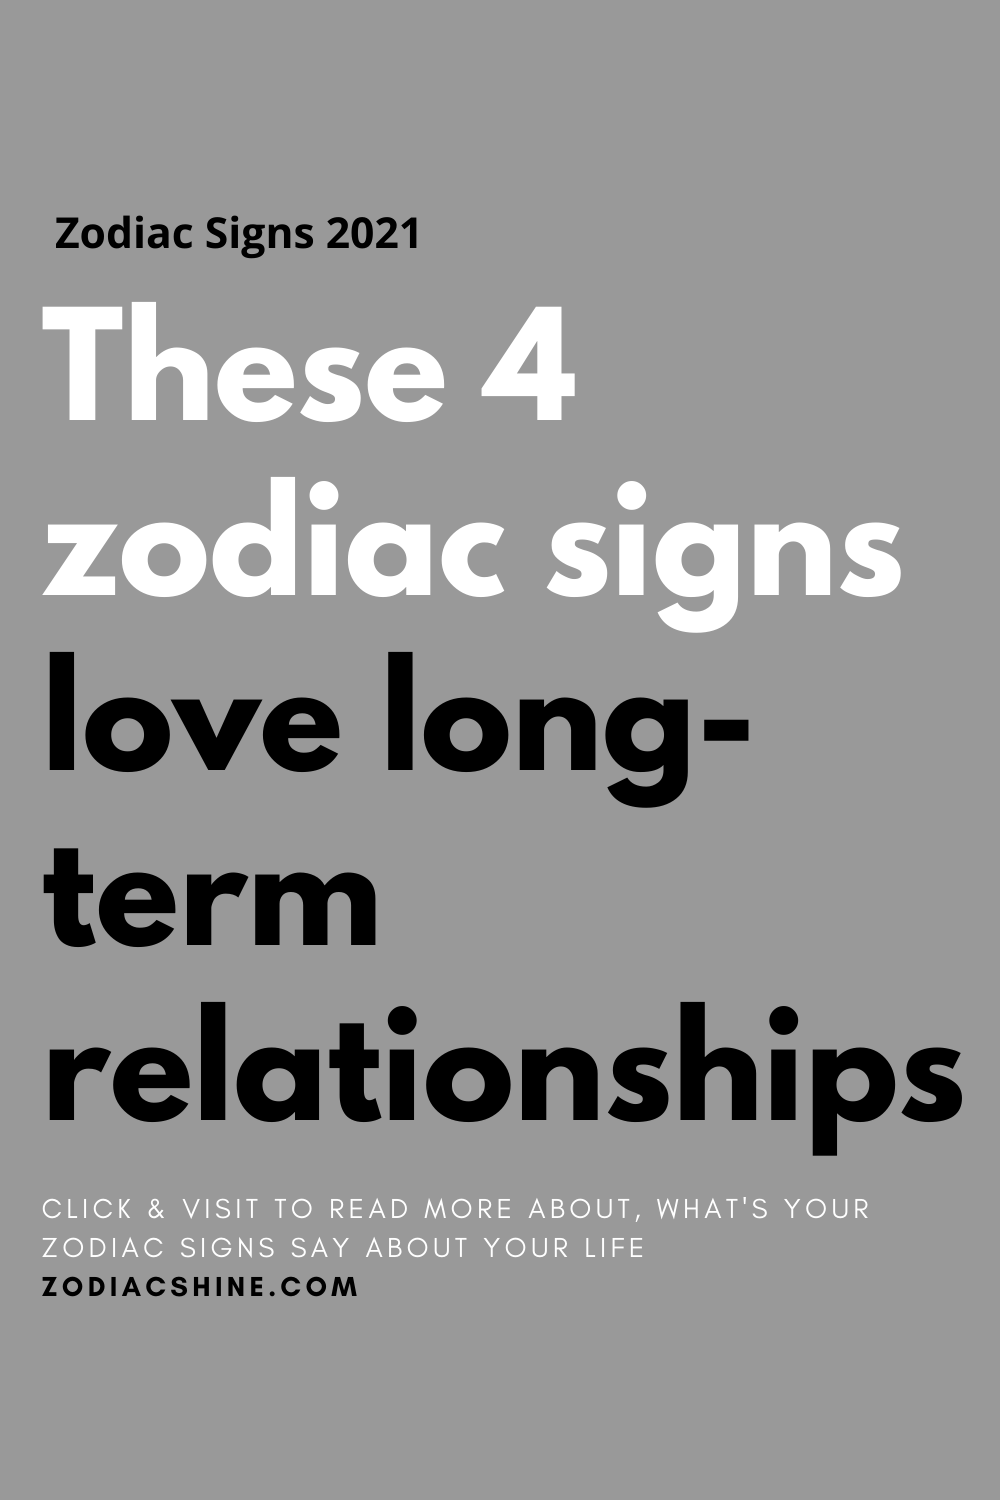 These 4 zodiac signs love long-term relationships